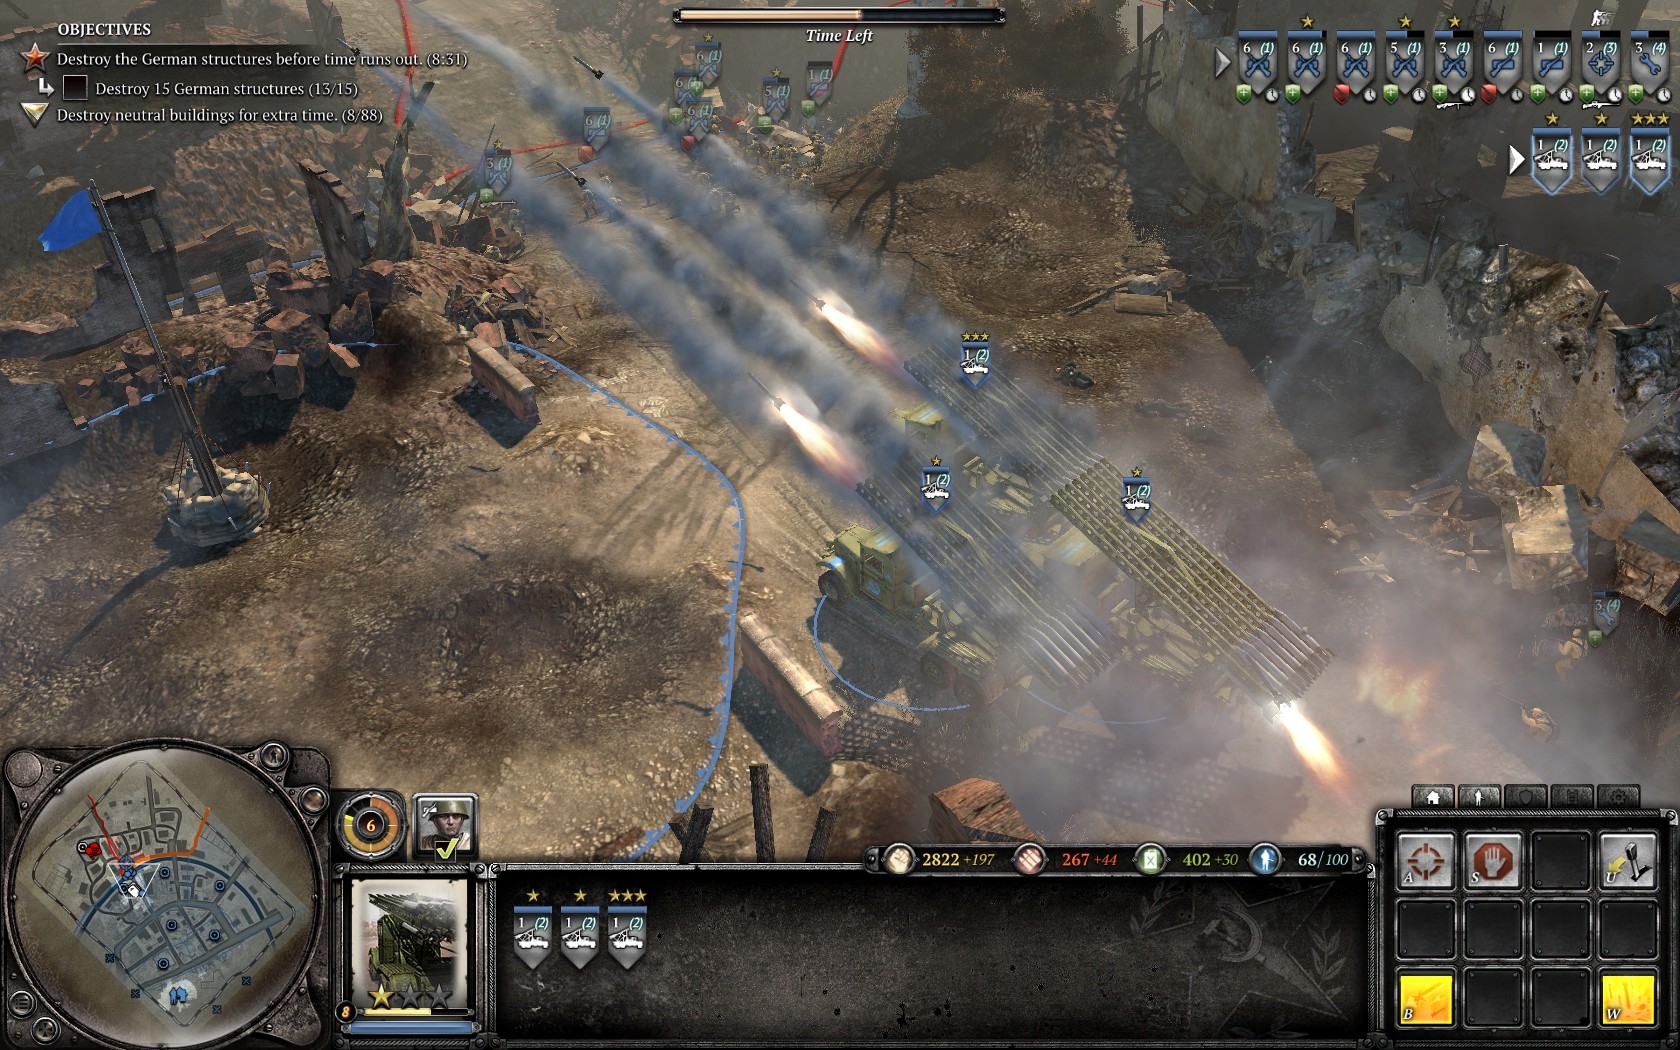 company of heroes 2 guide mission 4